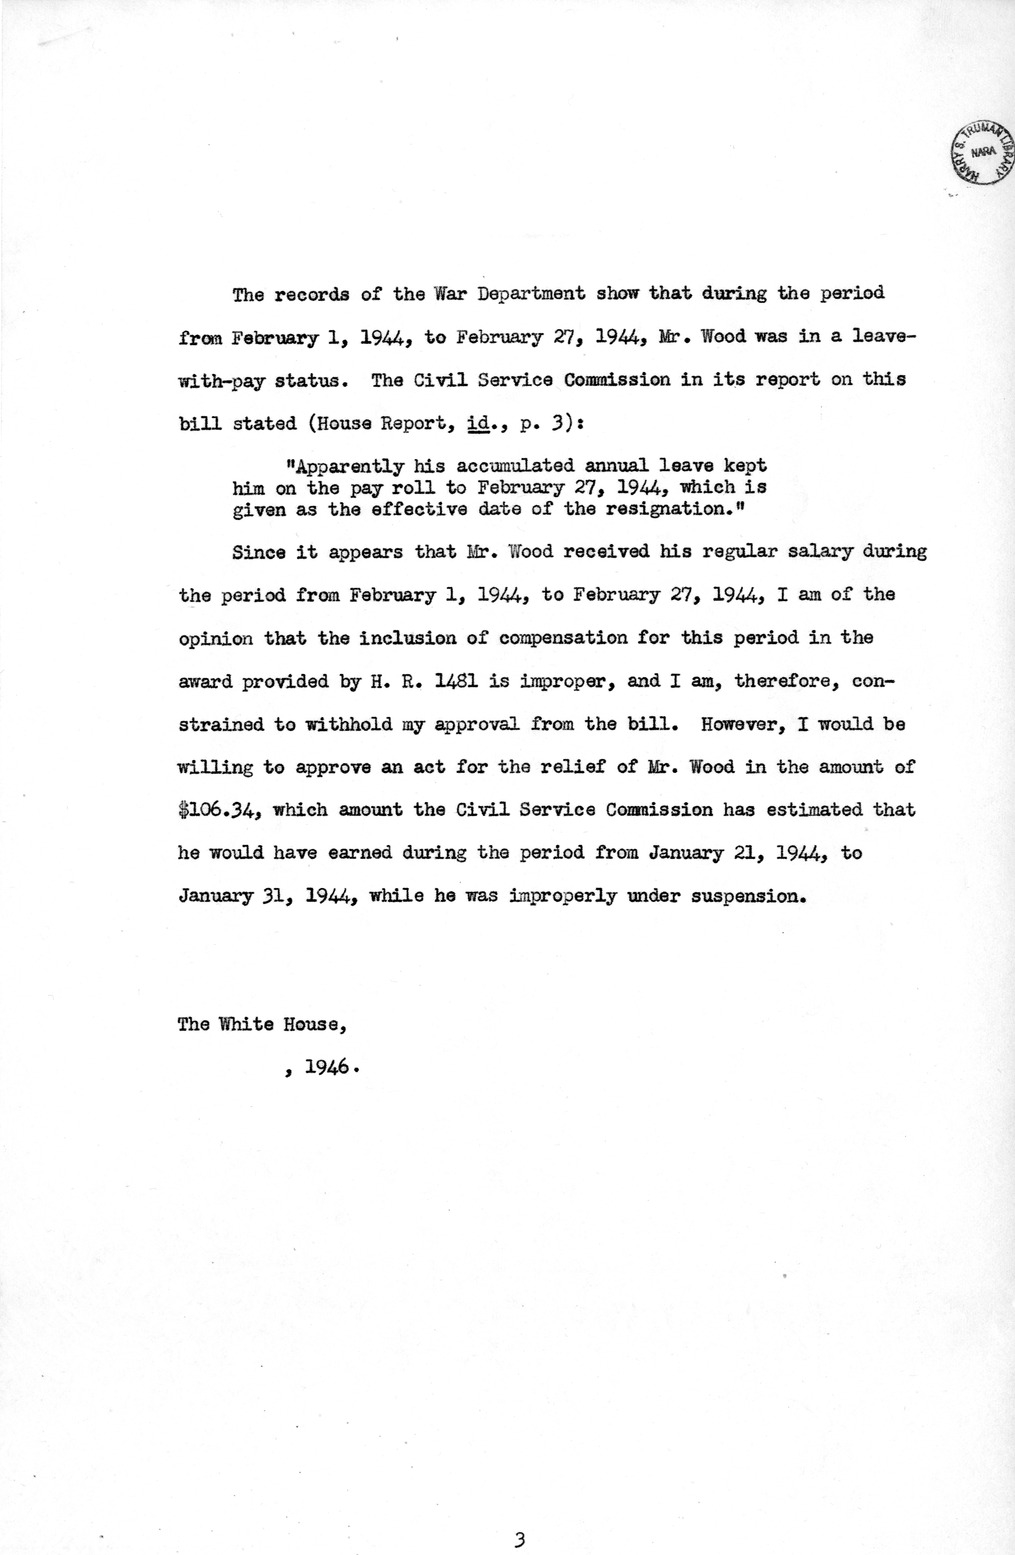 Memorandum from Harold D. Smith to M. C. Latta, H. R. 1481, For the Relief of R. W. Wood, with Attachments